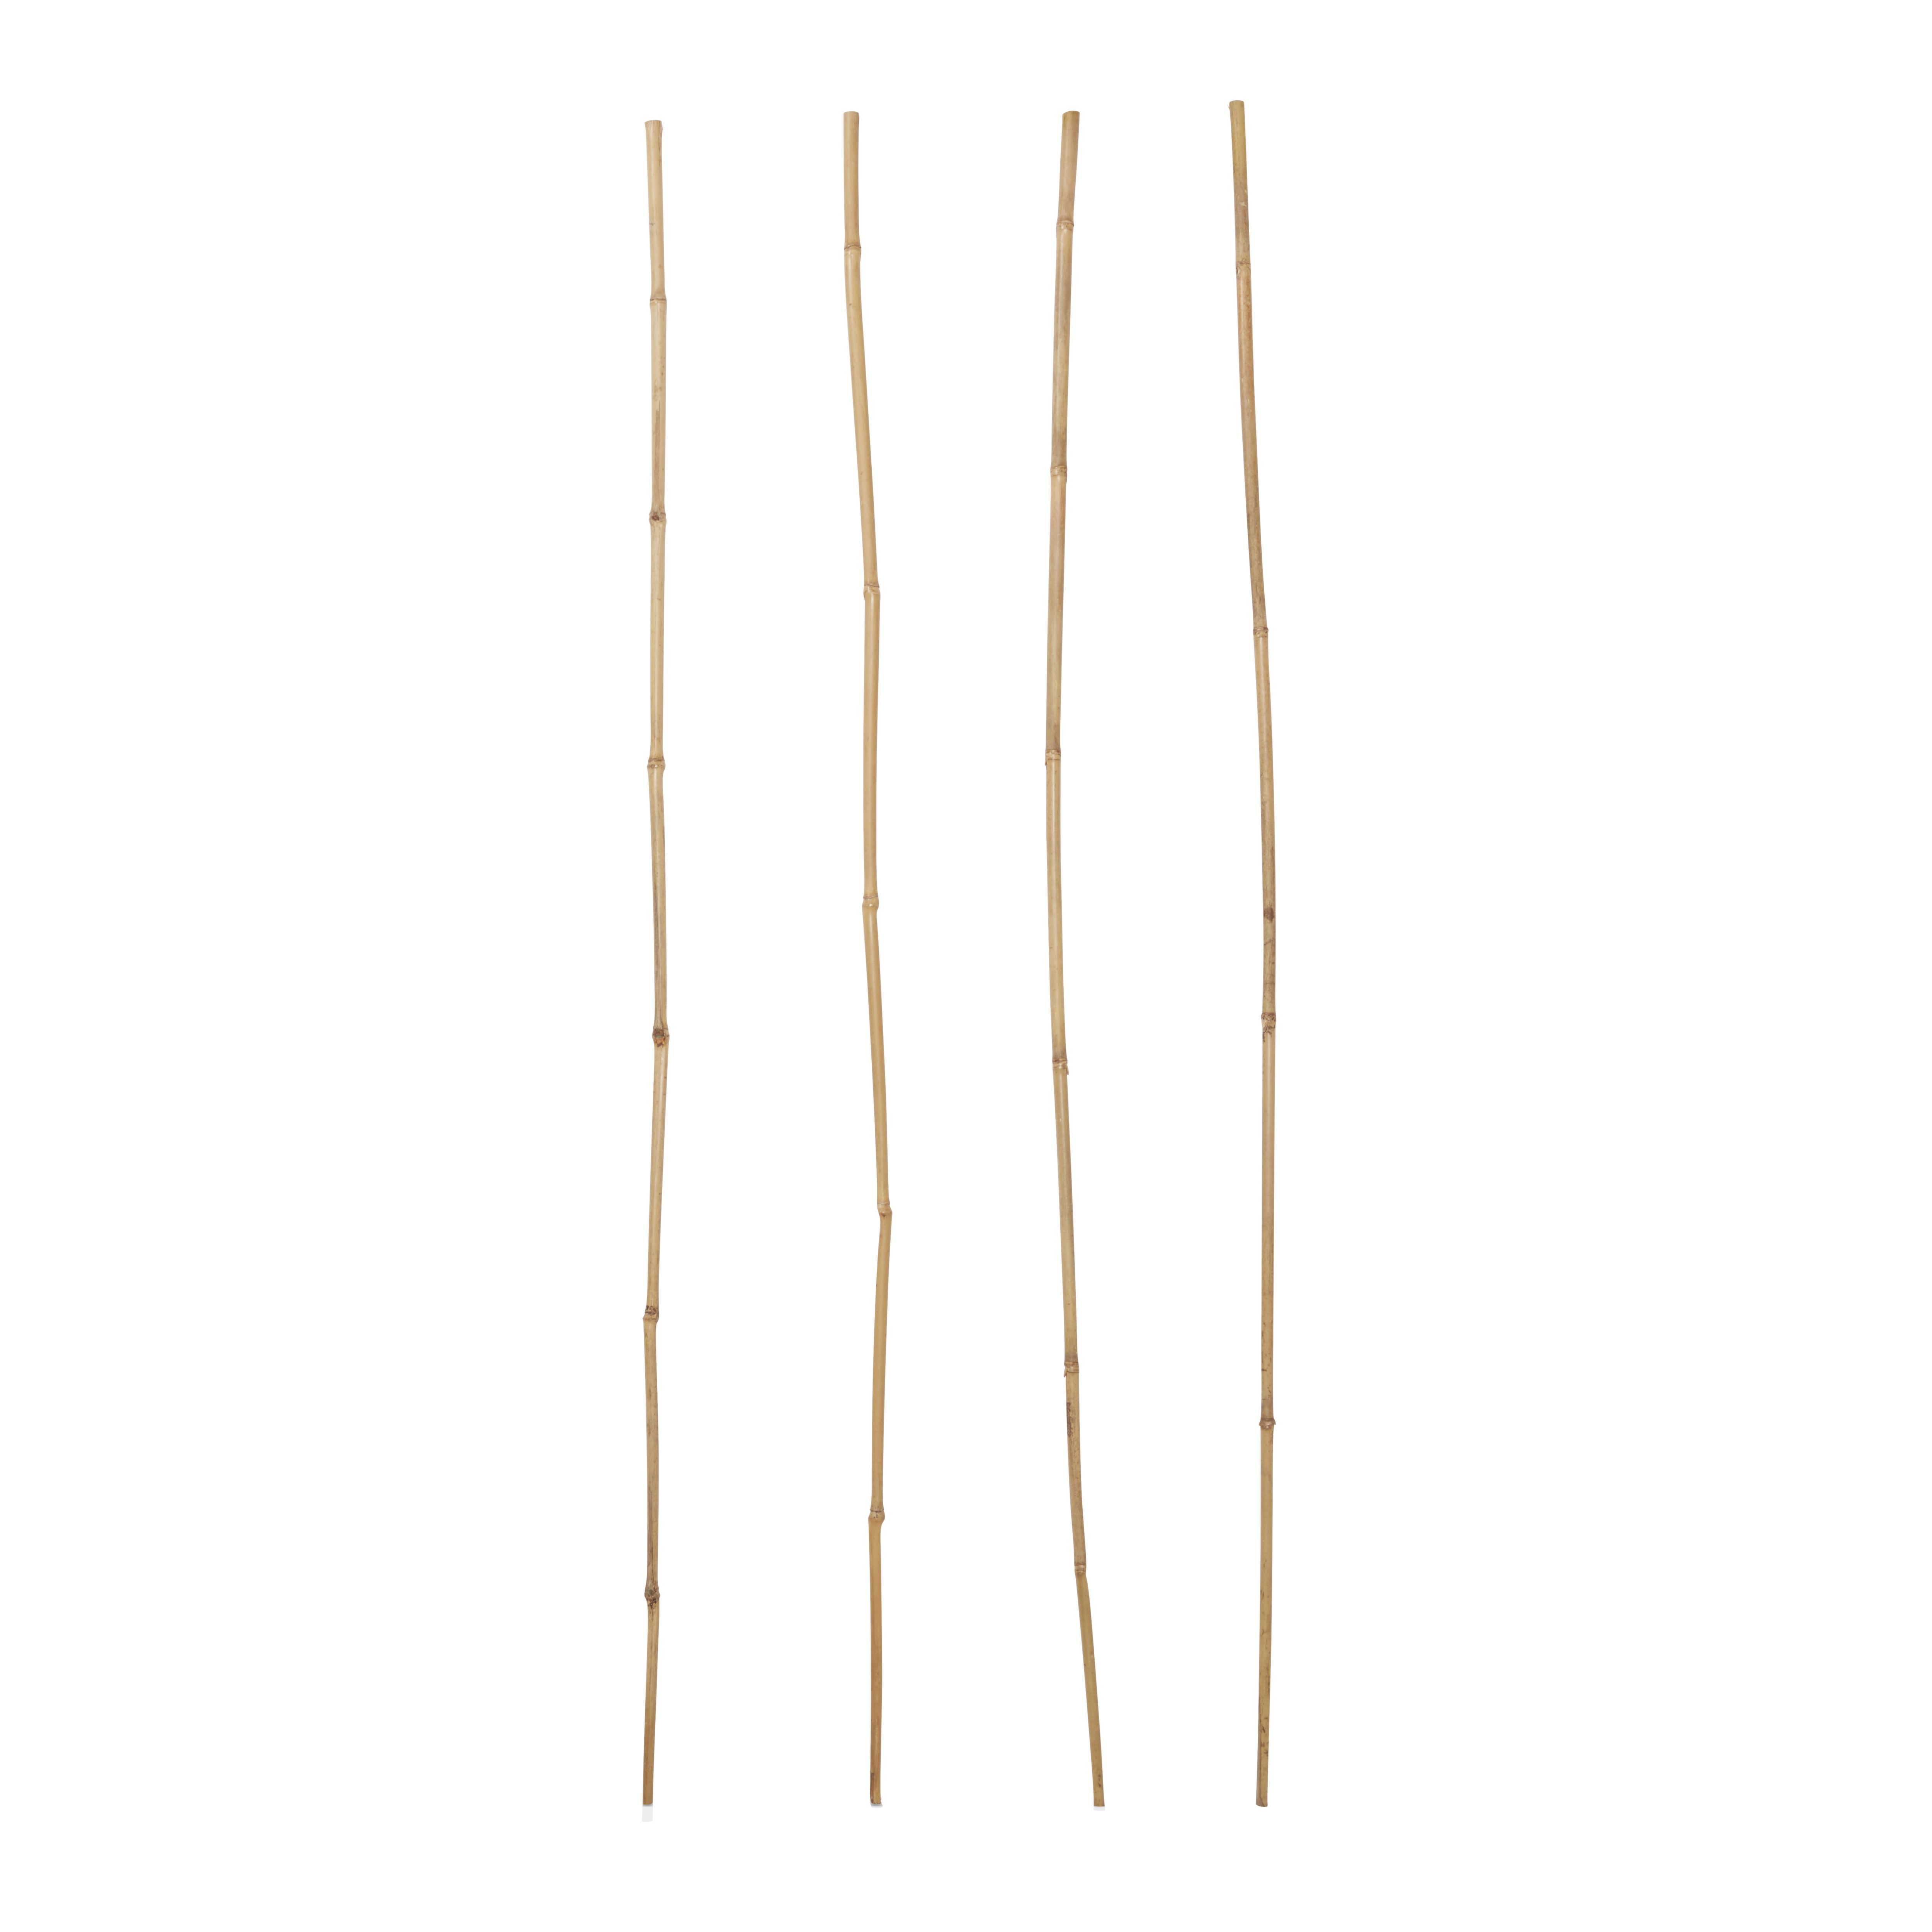 Verve Bamboo Cane 90cm, Pack of 15